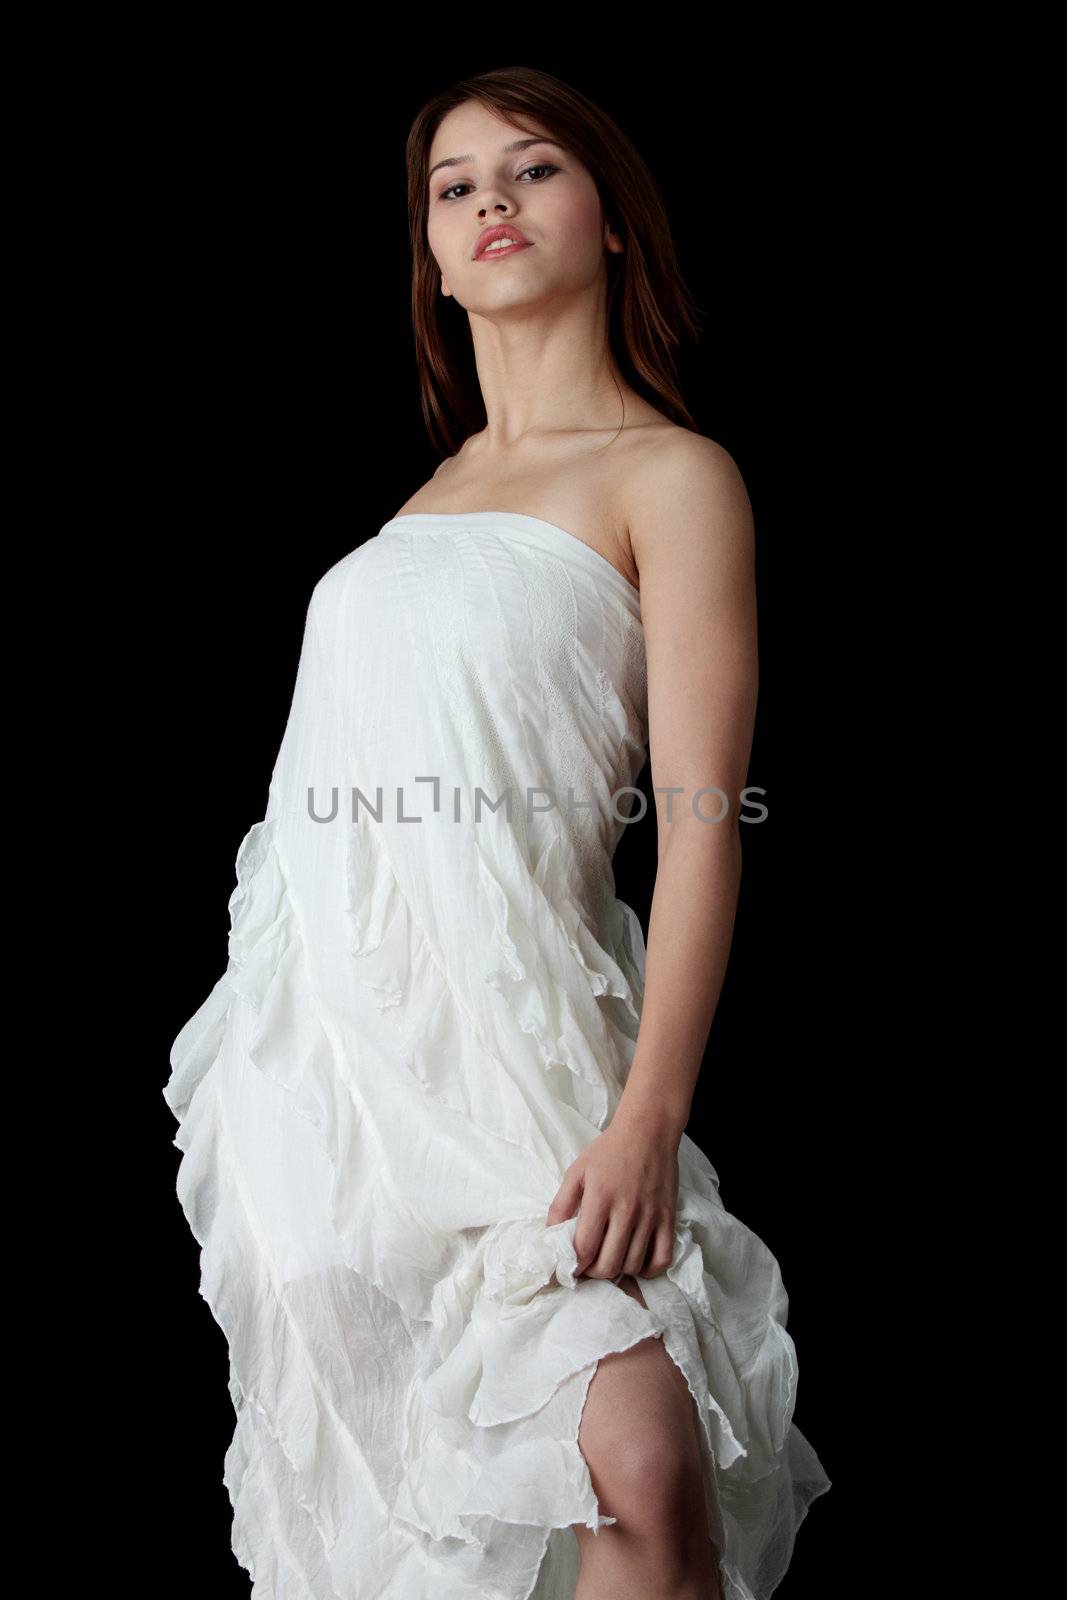 A young beautiful woman in white dress